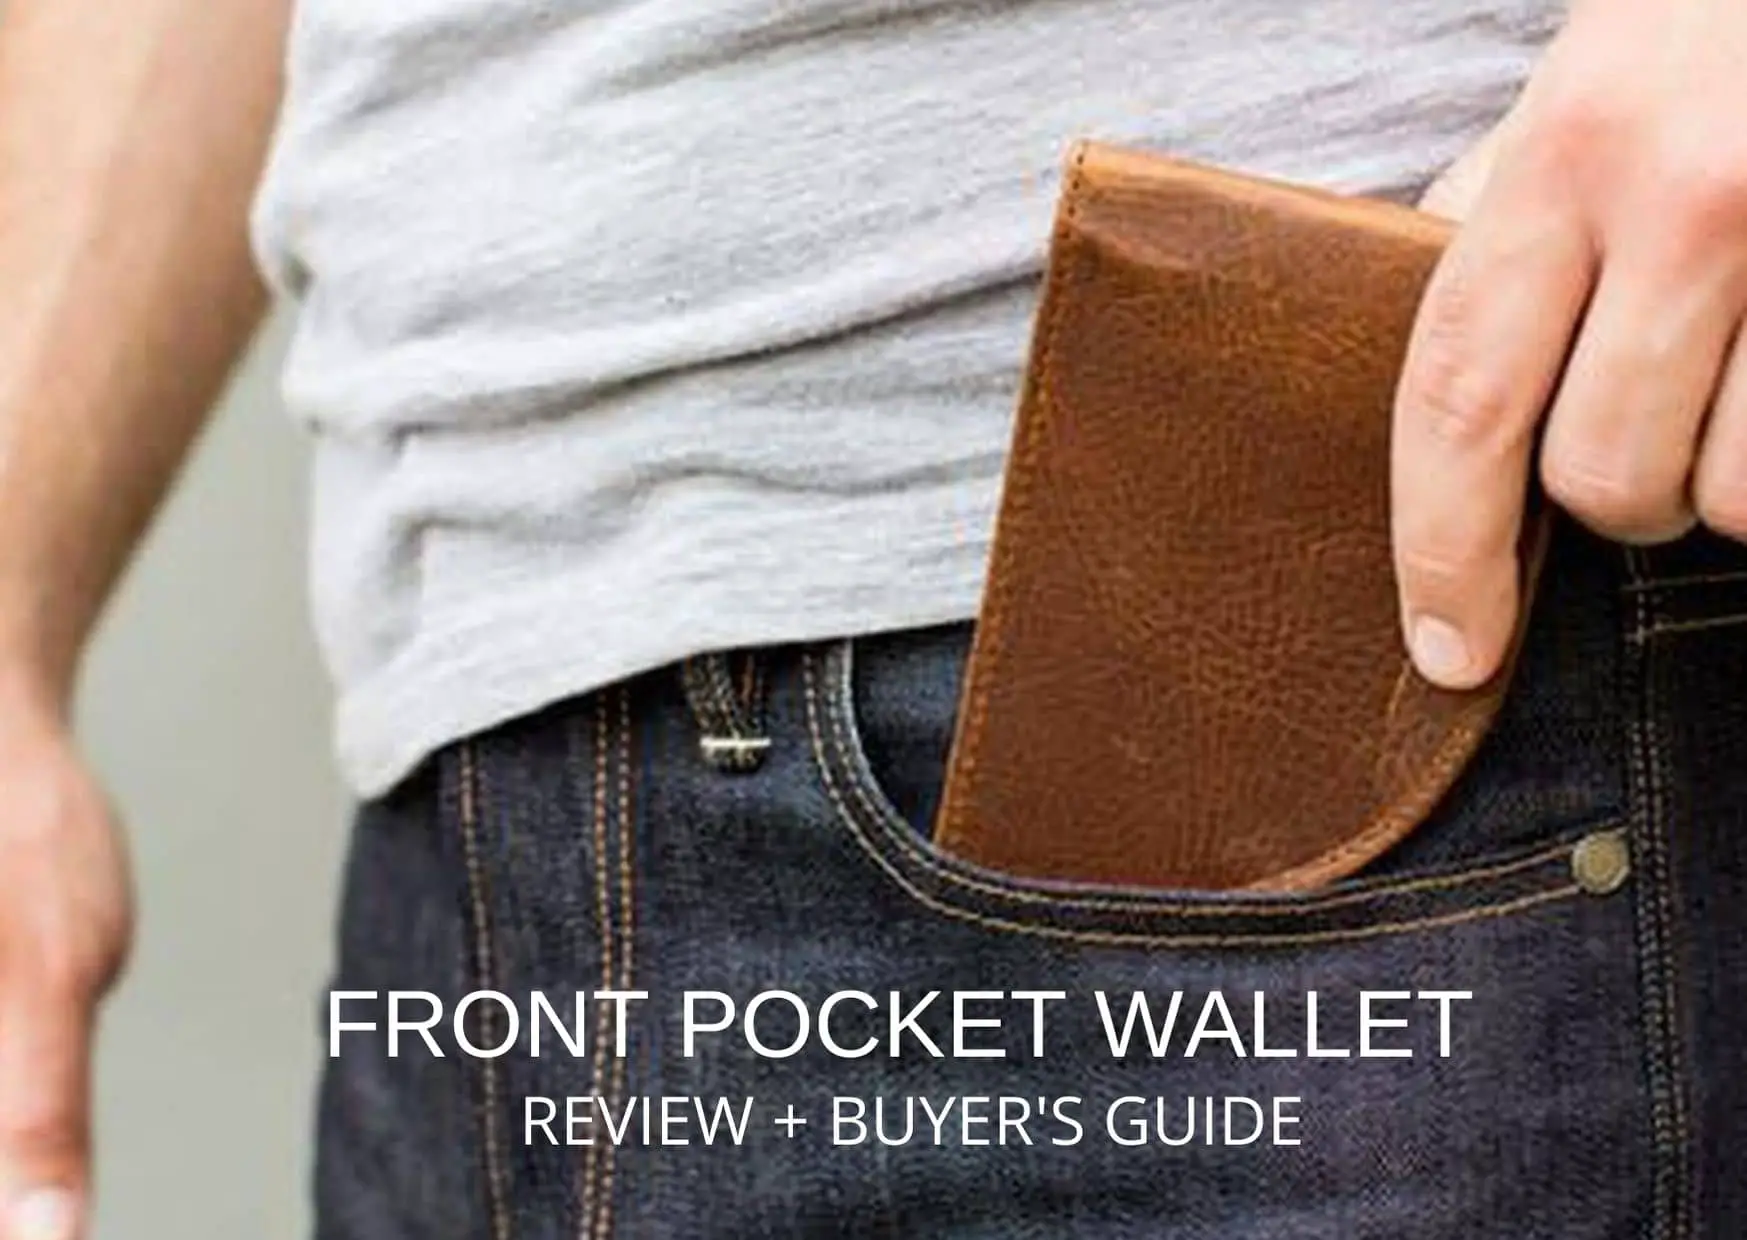 Amazon’s 8 Best Front Pocket Wallets: Review/Buyer’s Guide